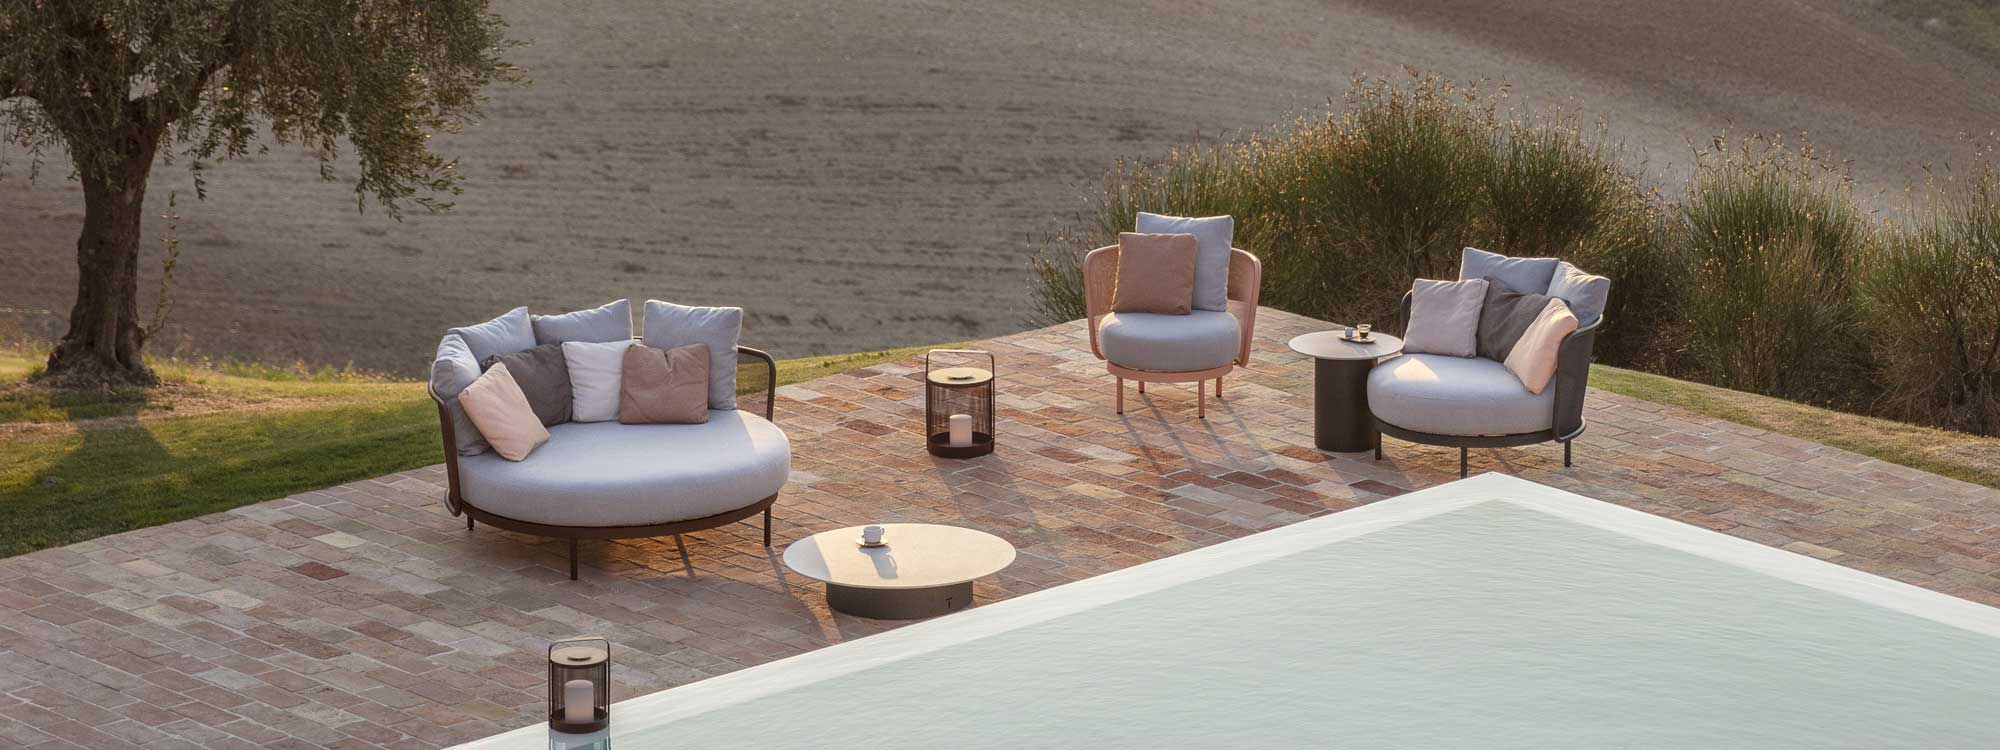 Baza exterior day bed and Baza Club outdoor lounge chair with Luci garden lanterns and Branta low table on terrace